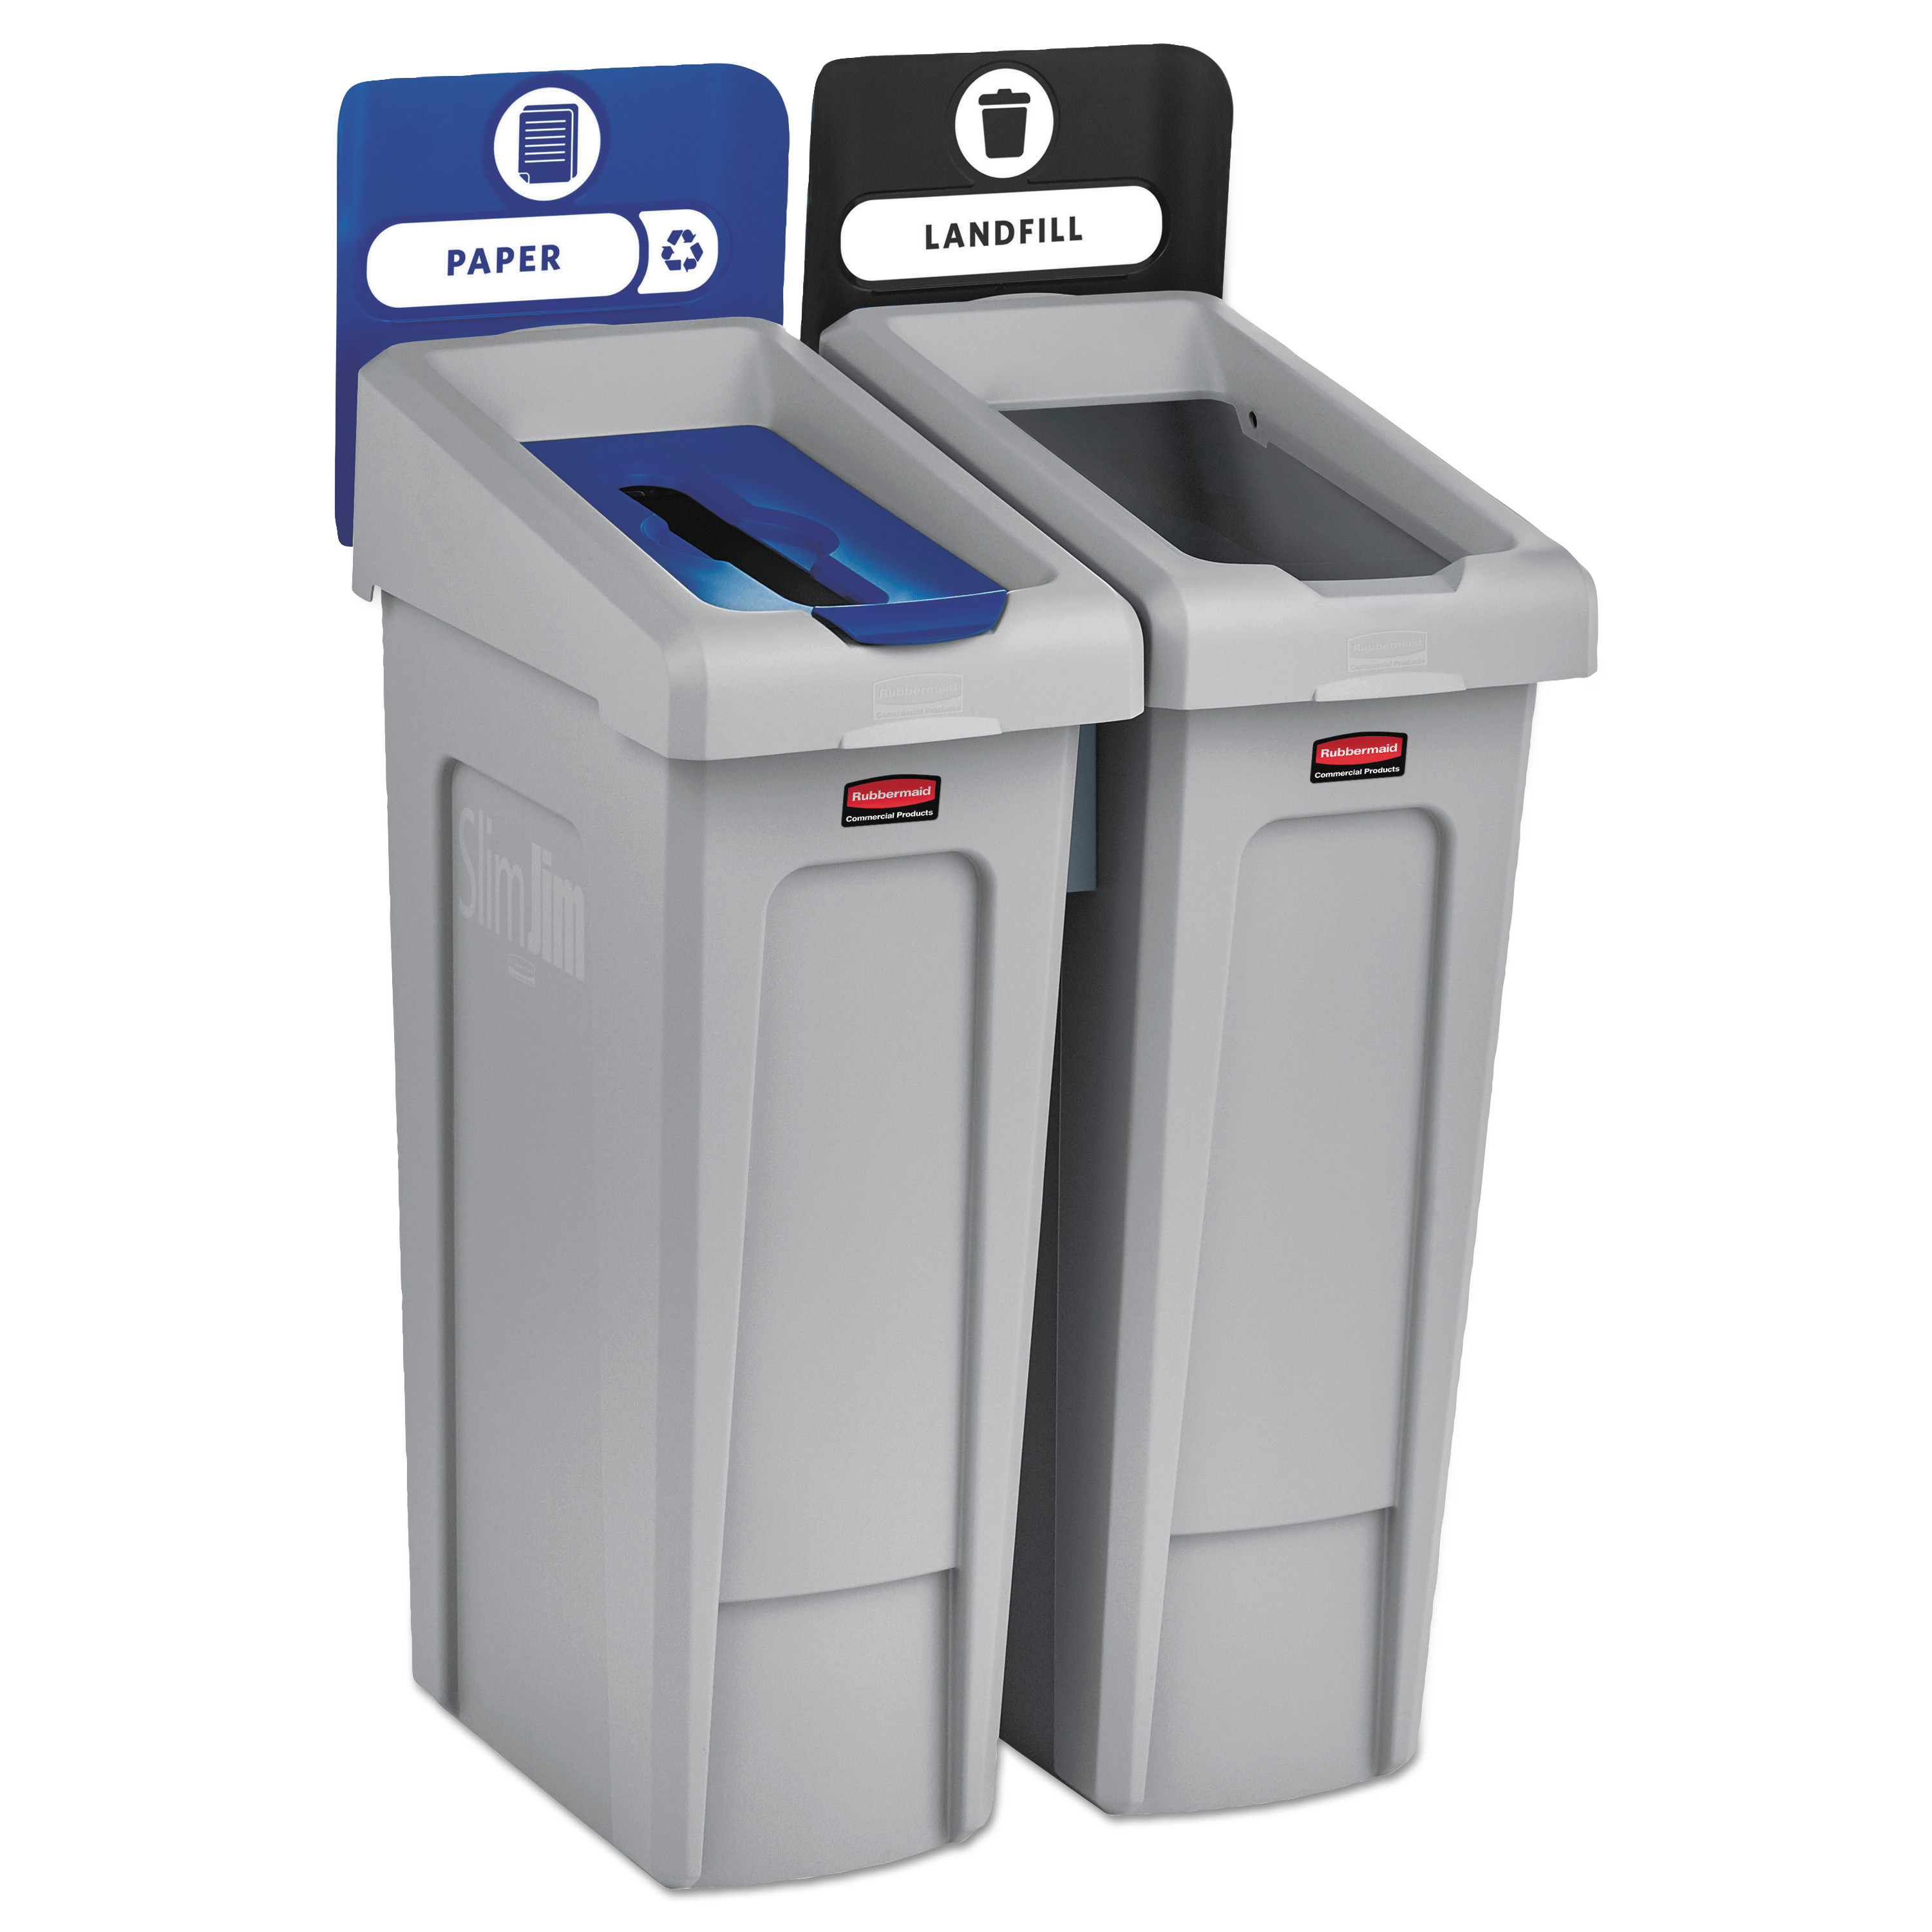  Rubbermaid Commercial 2007915 Slim Jim Recycling Station Kit, 46 gal, 2-Stream Landfill/Paper (RCP2007915) 